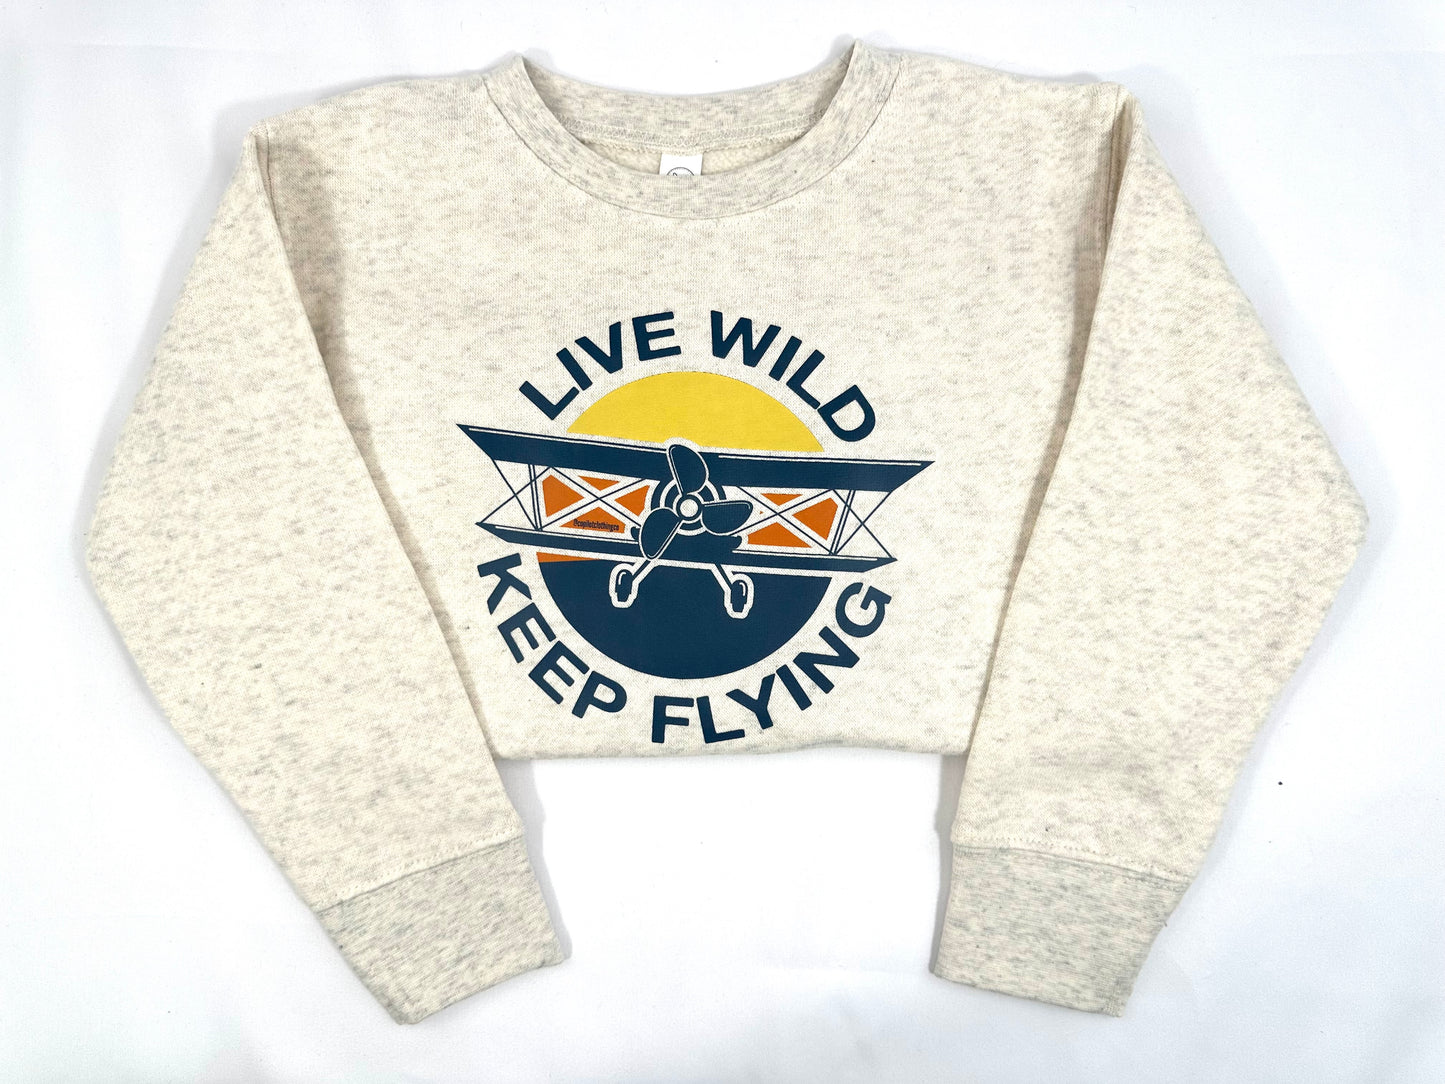 Live wild keep flying graphic